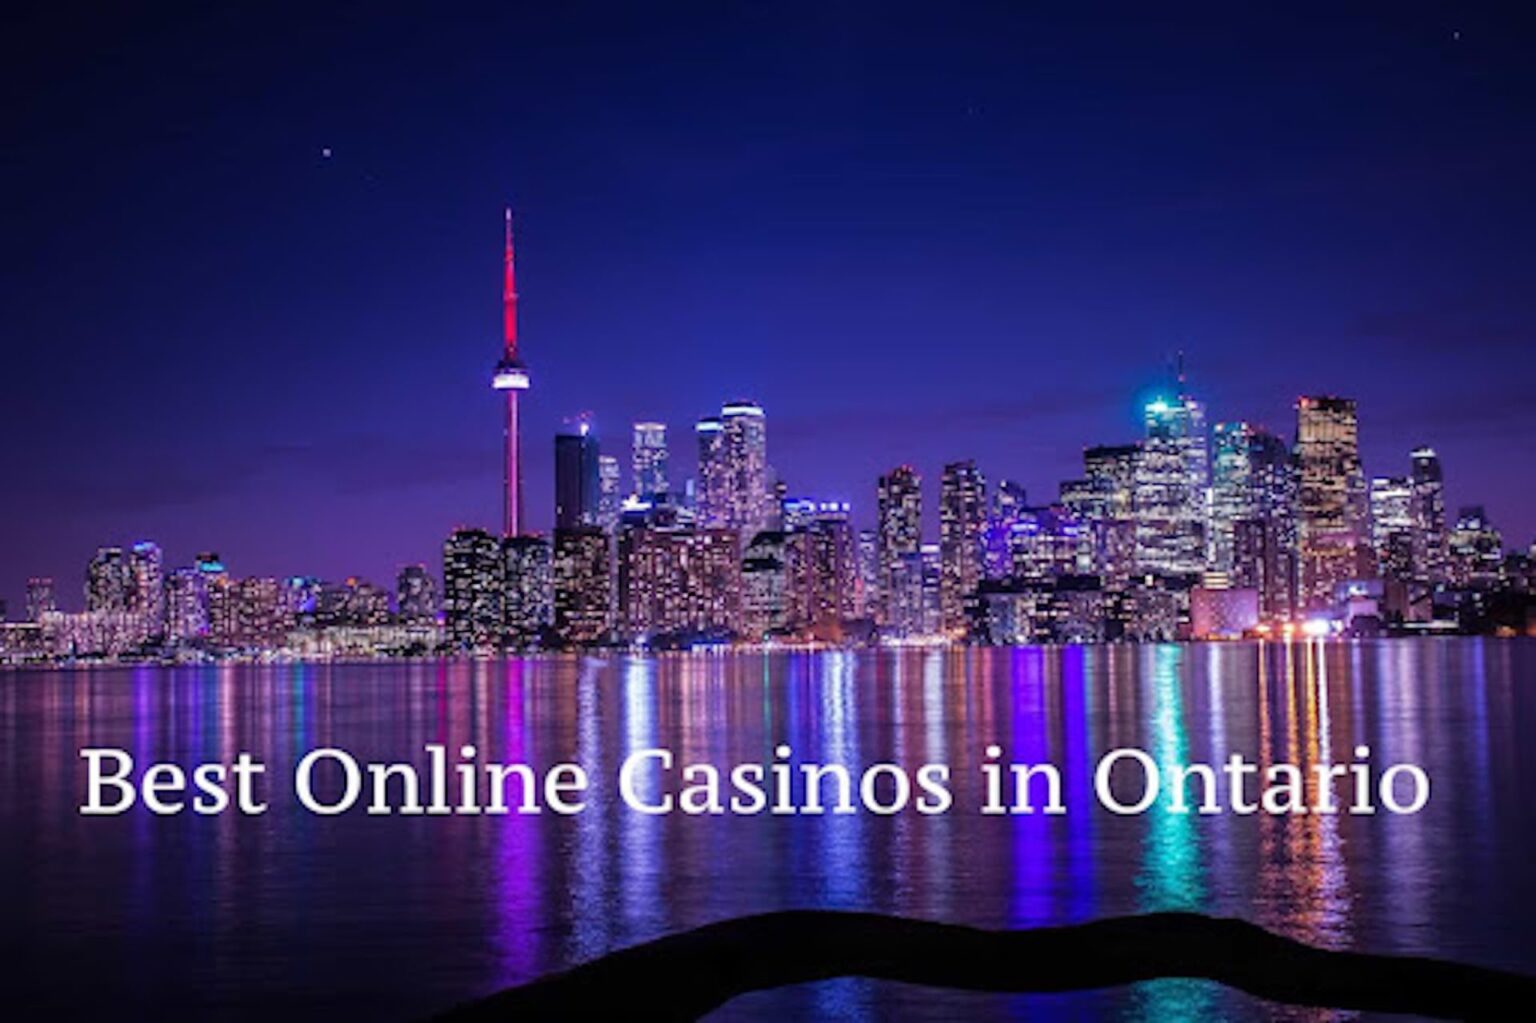 The pandemic is over but online casinos came to stay. Here's a list of the best Ontario online casinos, discover all you need to know.